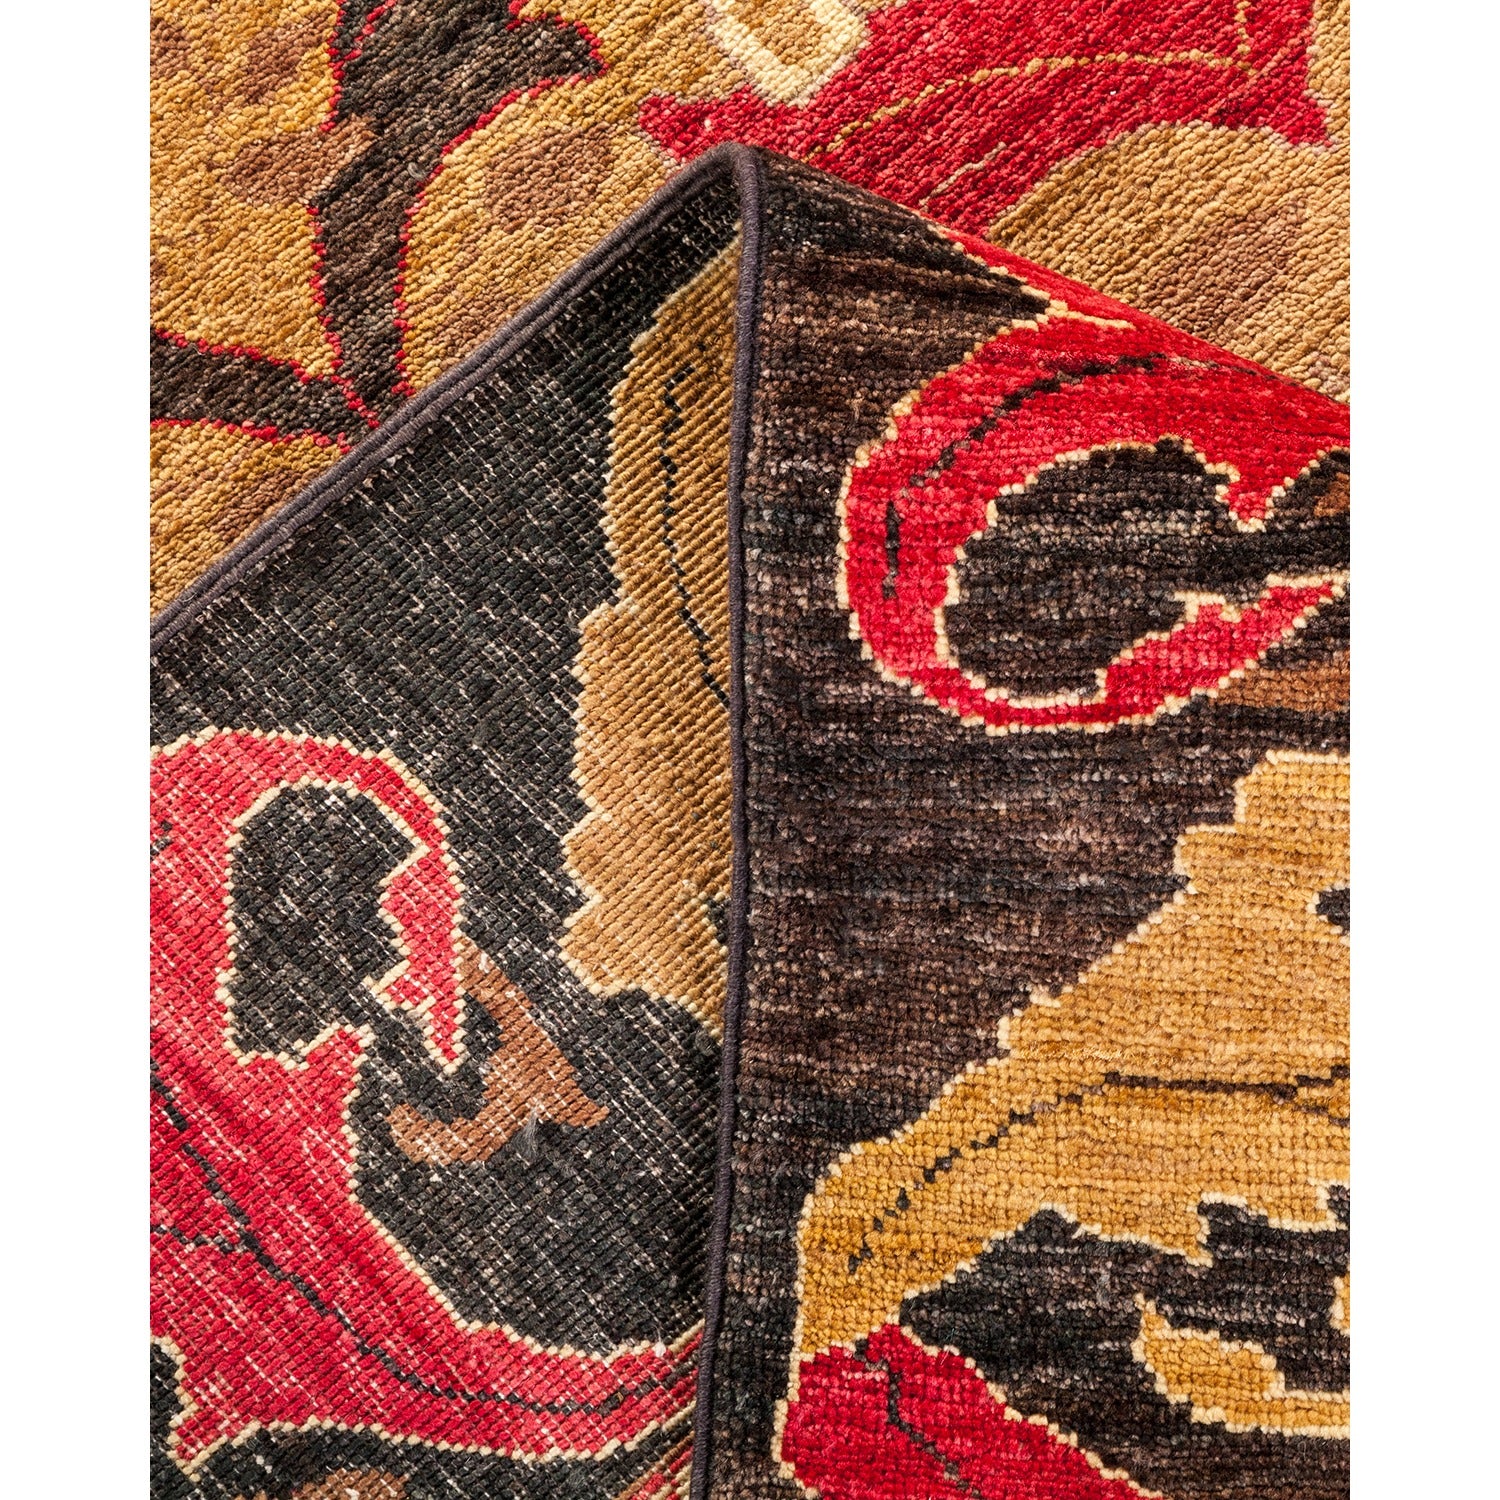 Intricate traditional carpet with folded edge showcases exquisite craftsmanship.